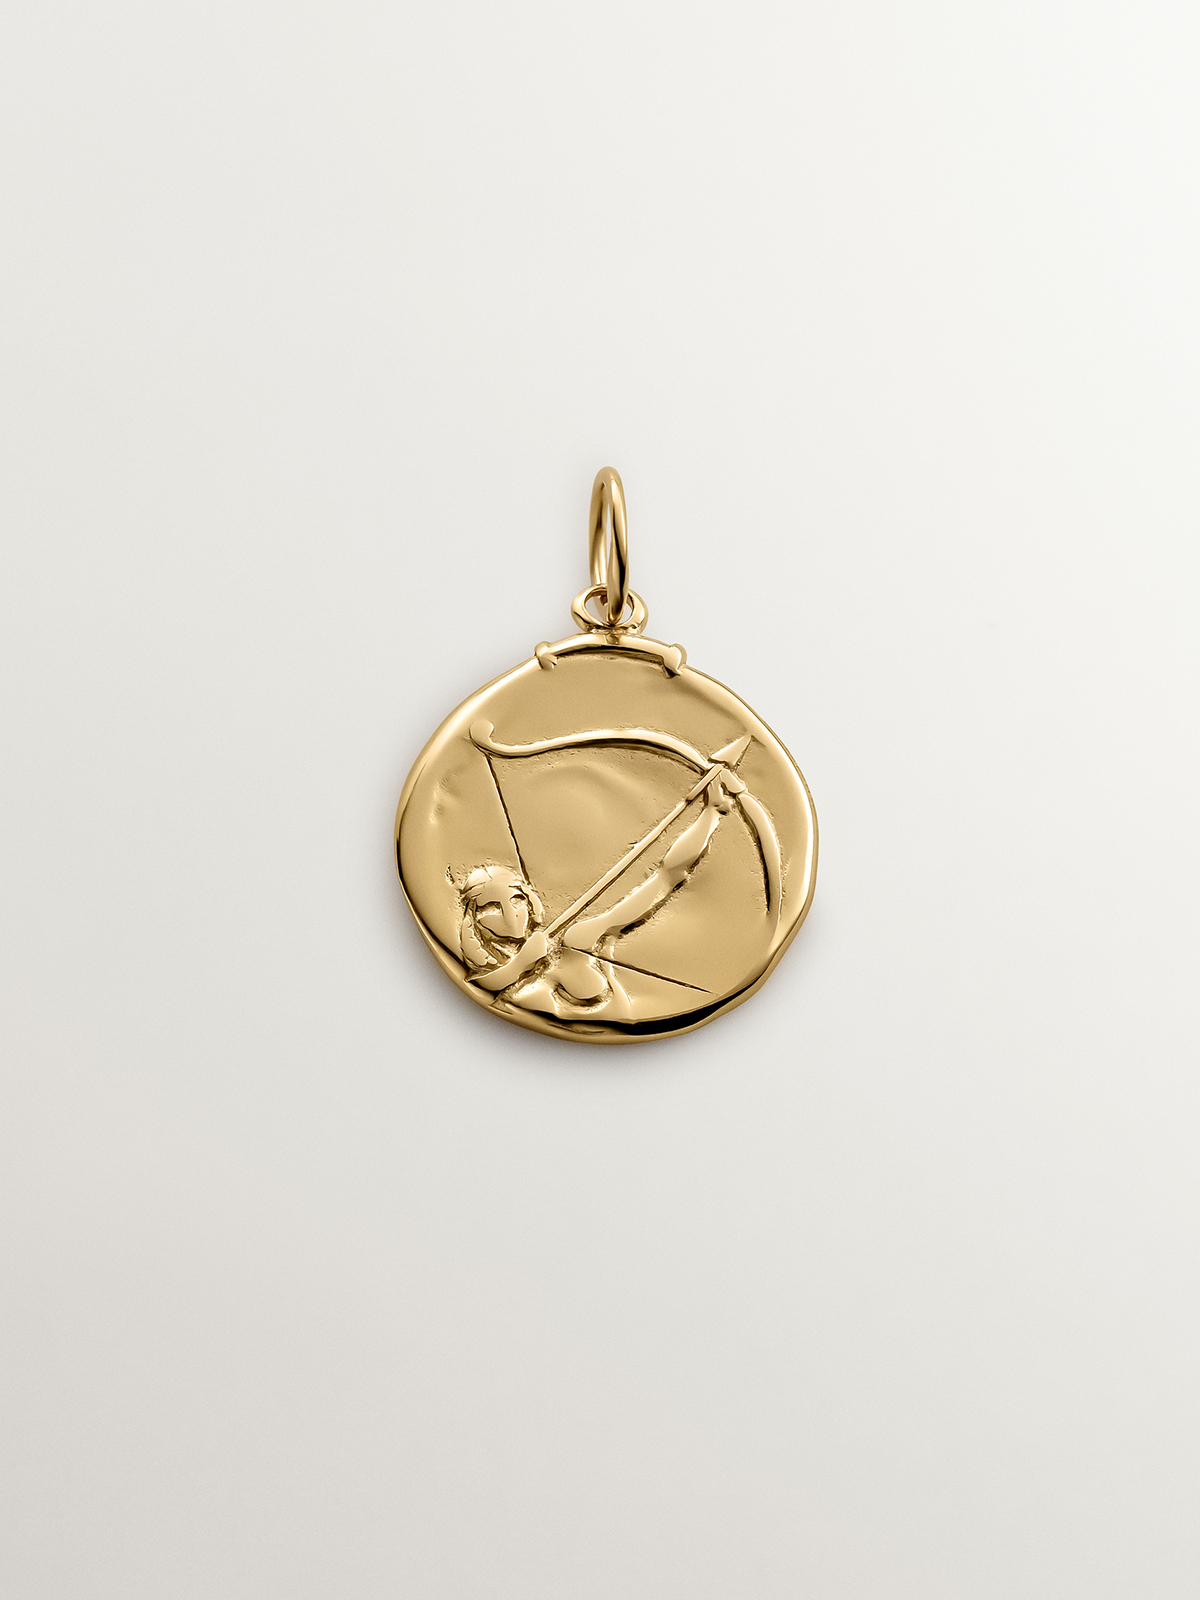 Sagittarius Charm crafted from 925 silver covered in 18K yellow gold